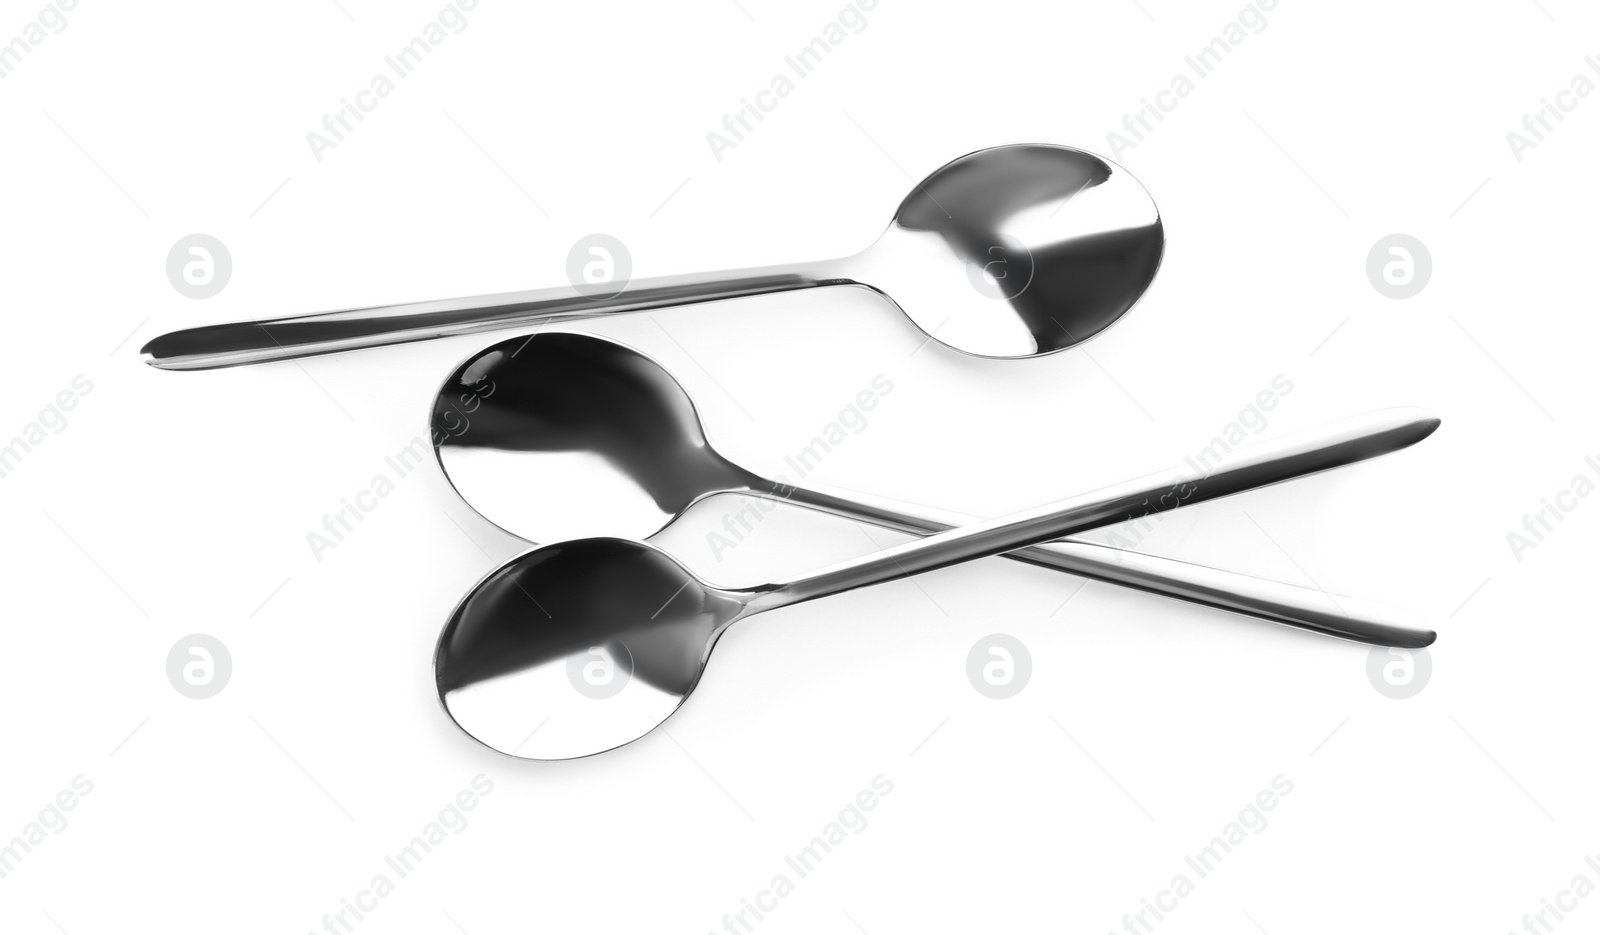 Photo of Clean shiny metal spoons on white background, top view